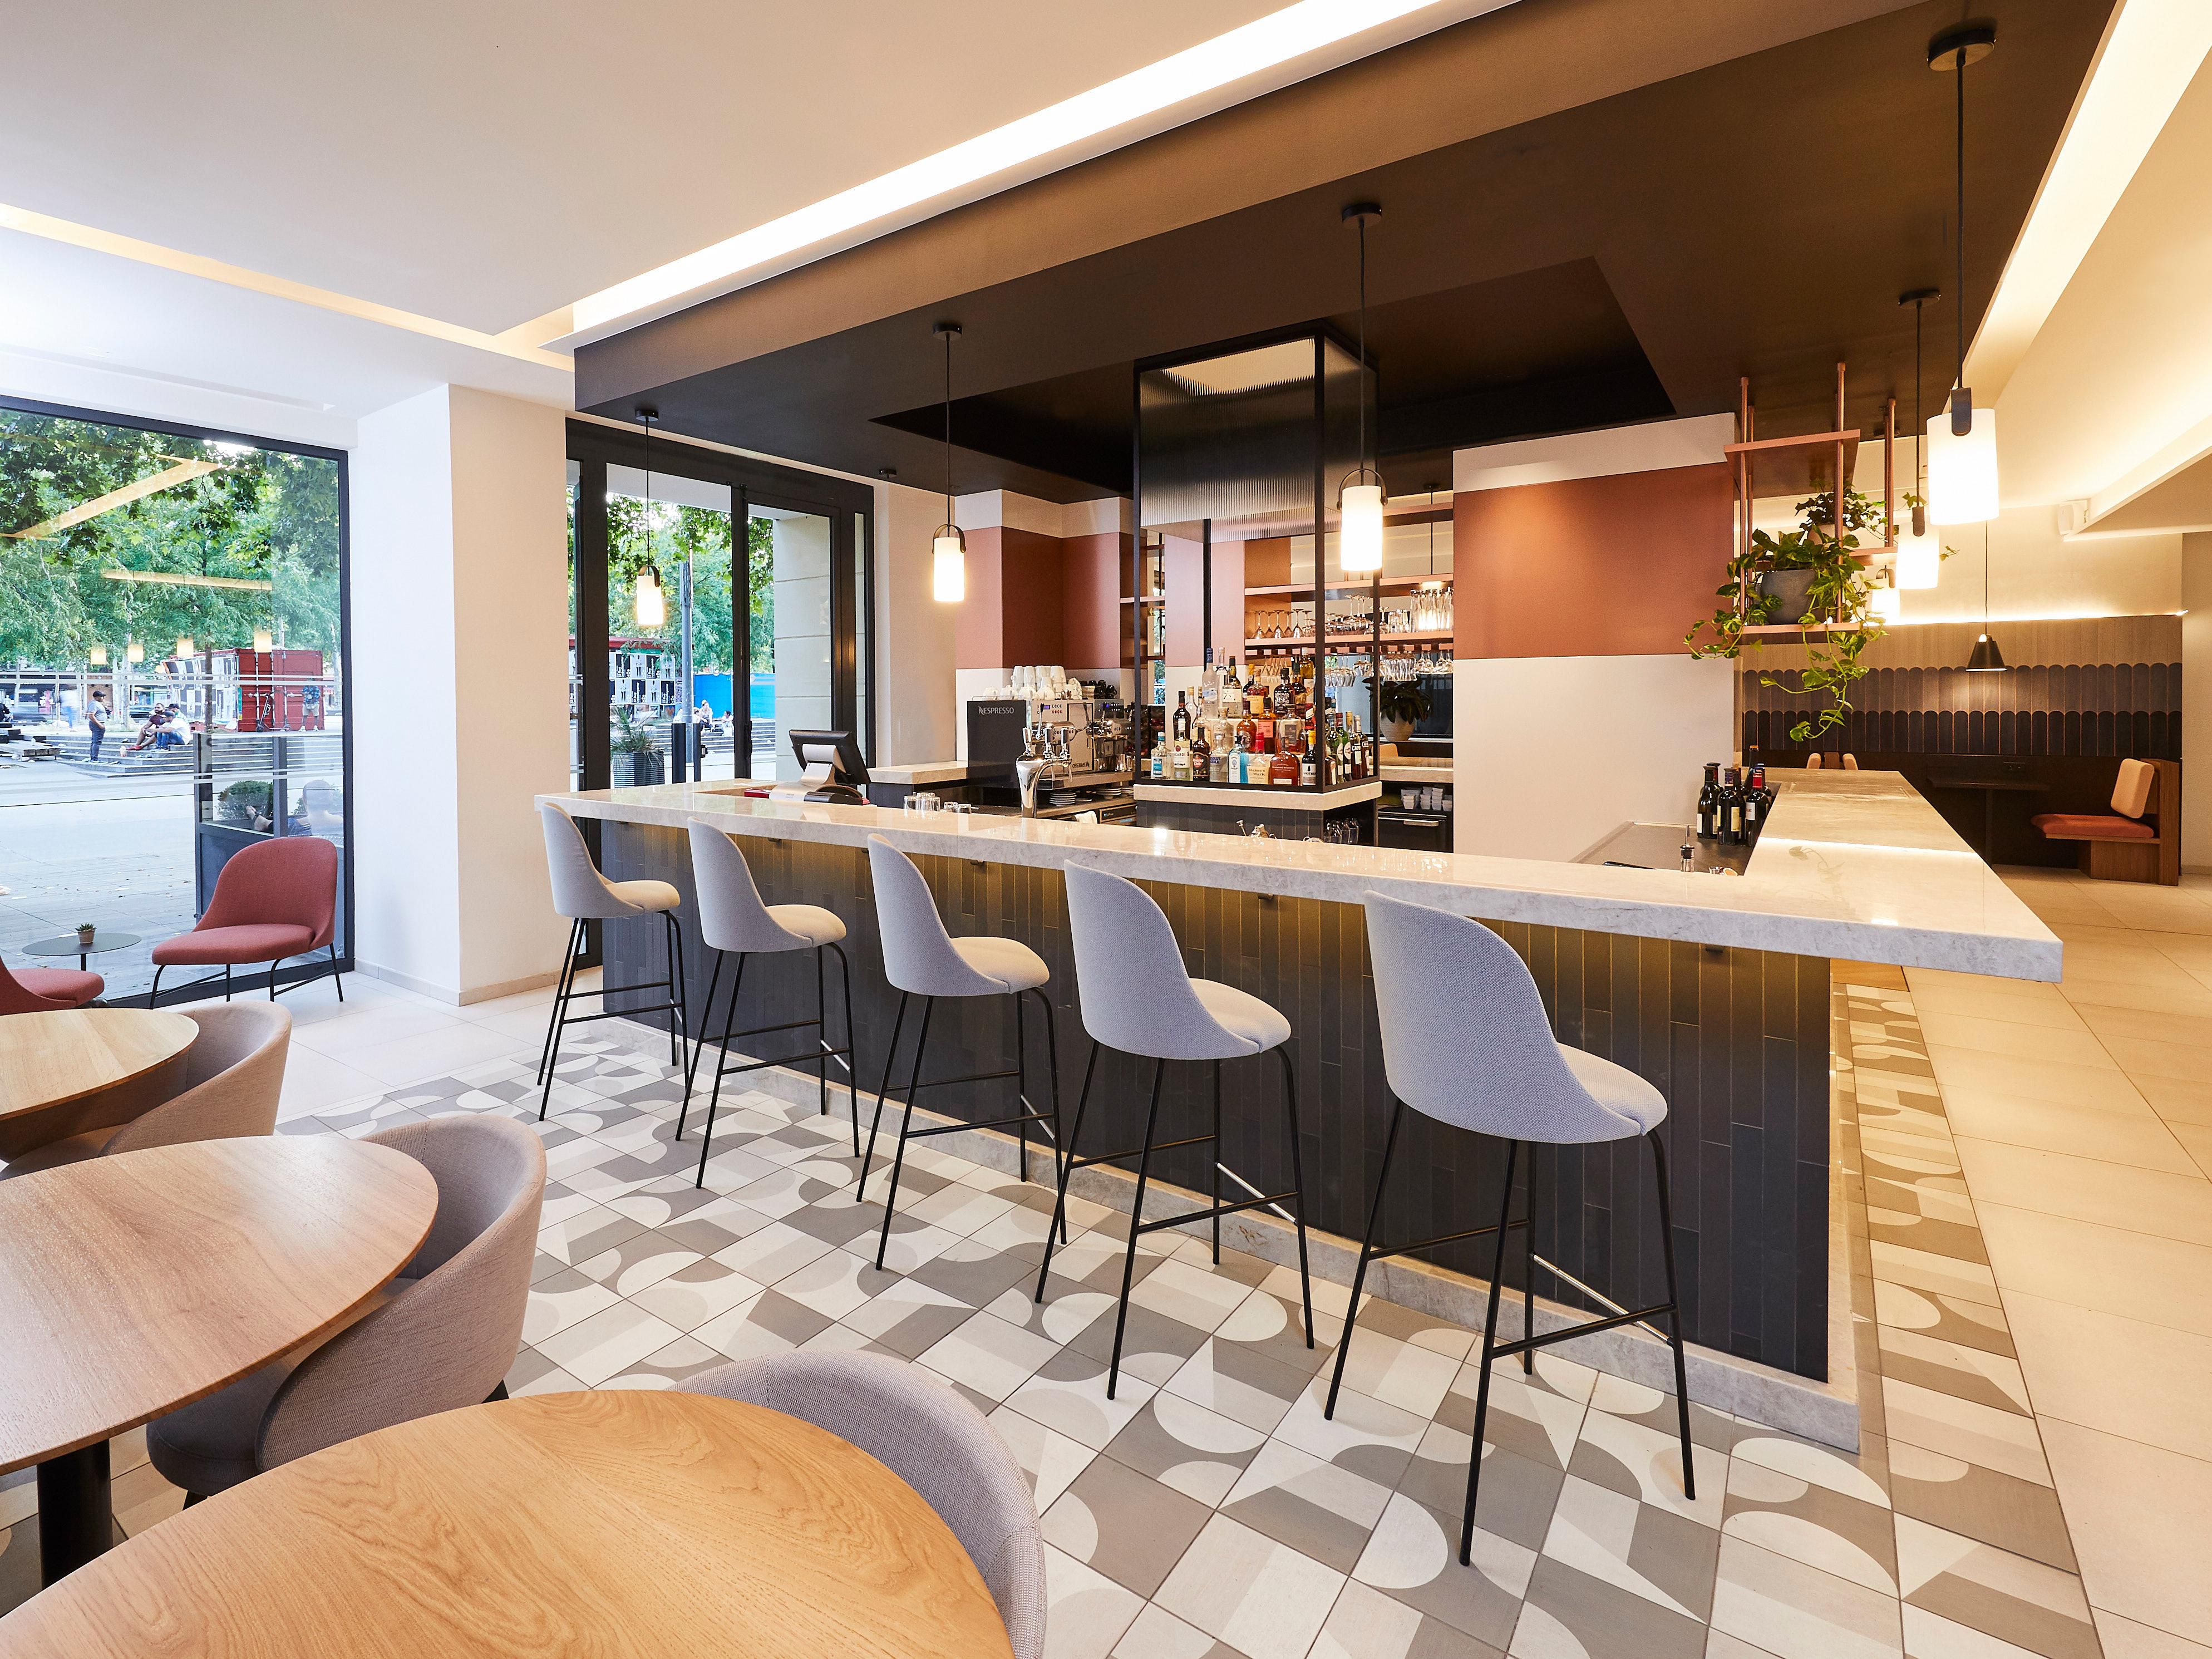 Crowne Plaza Paris - République, redesigned to work the way you do. Our vibrant new spaces allow you to easily switch from work time to downtime. Centred around our signature bar, our flexible spaces are perfect for working solo, collaborating or socialising.